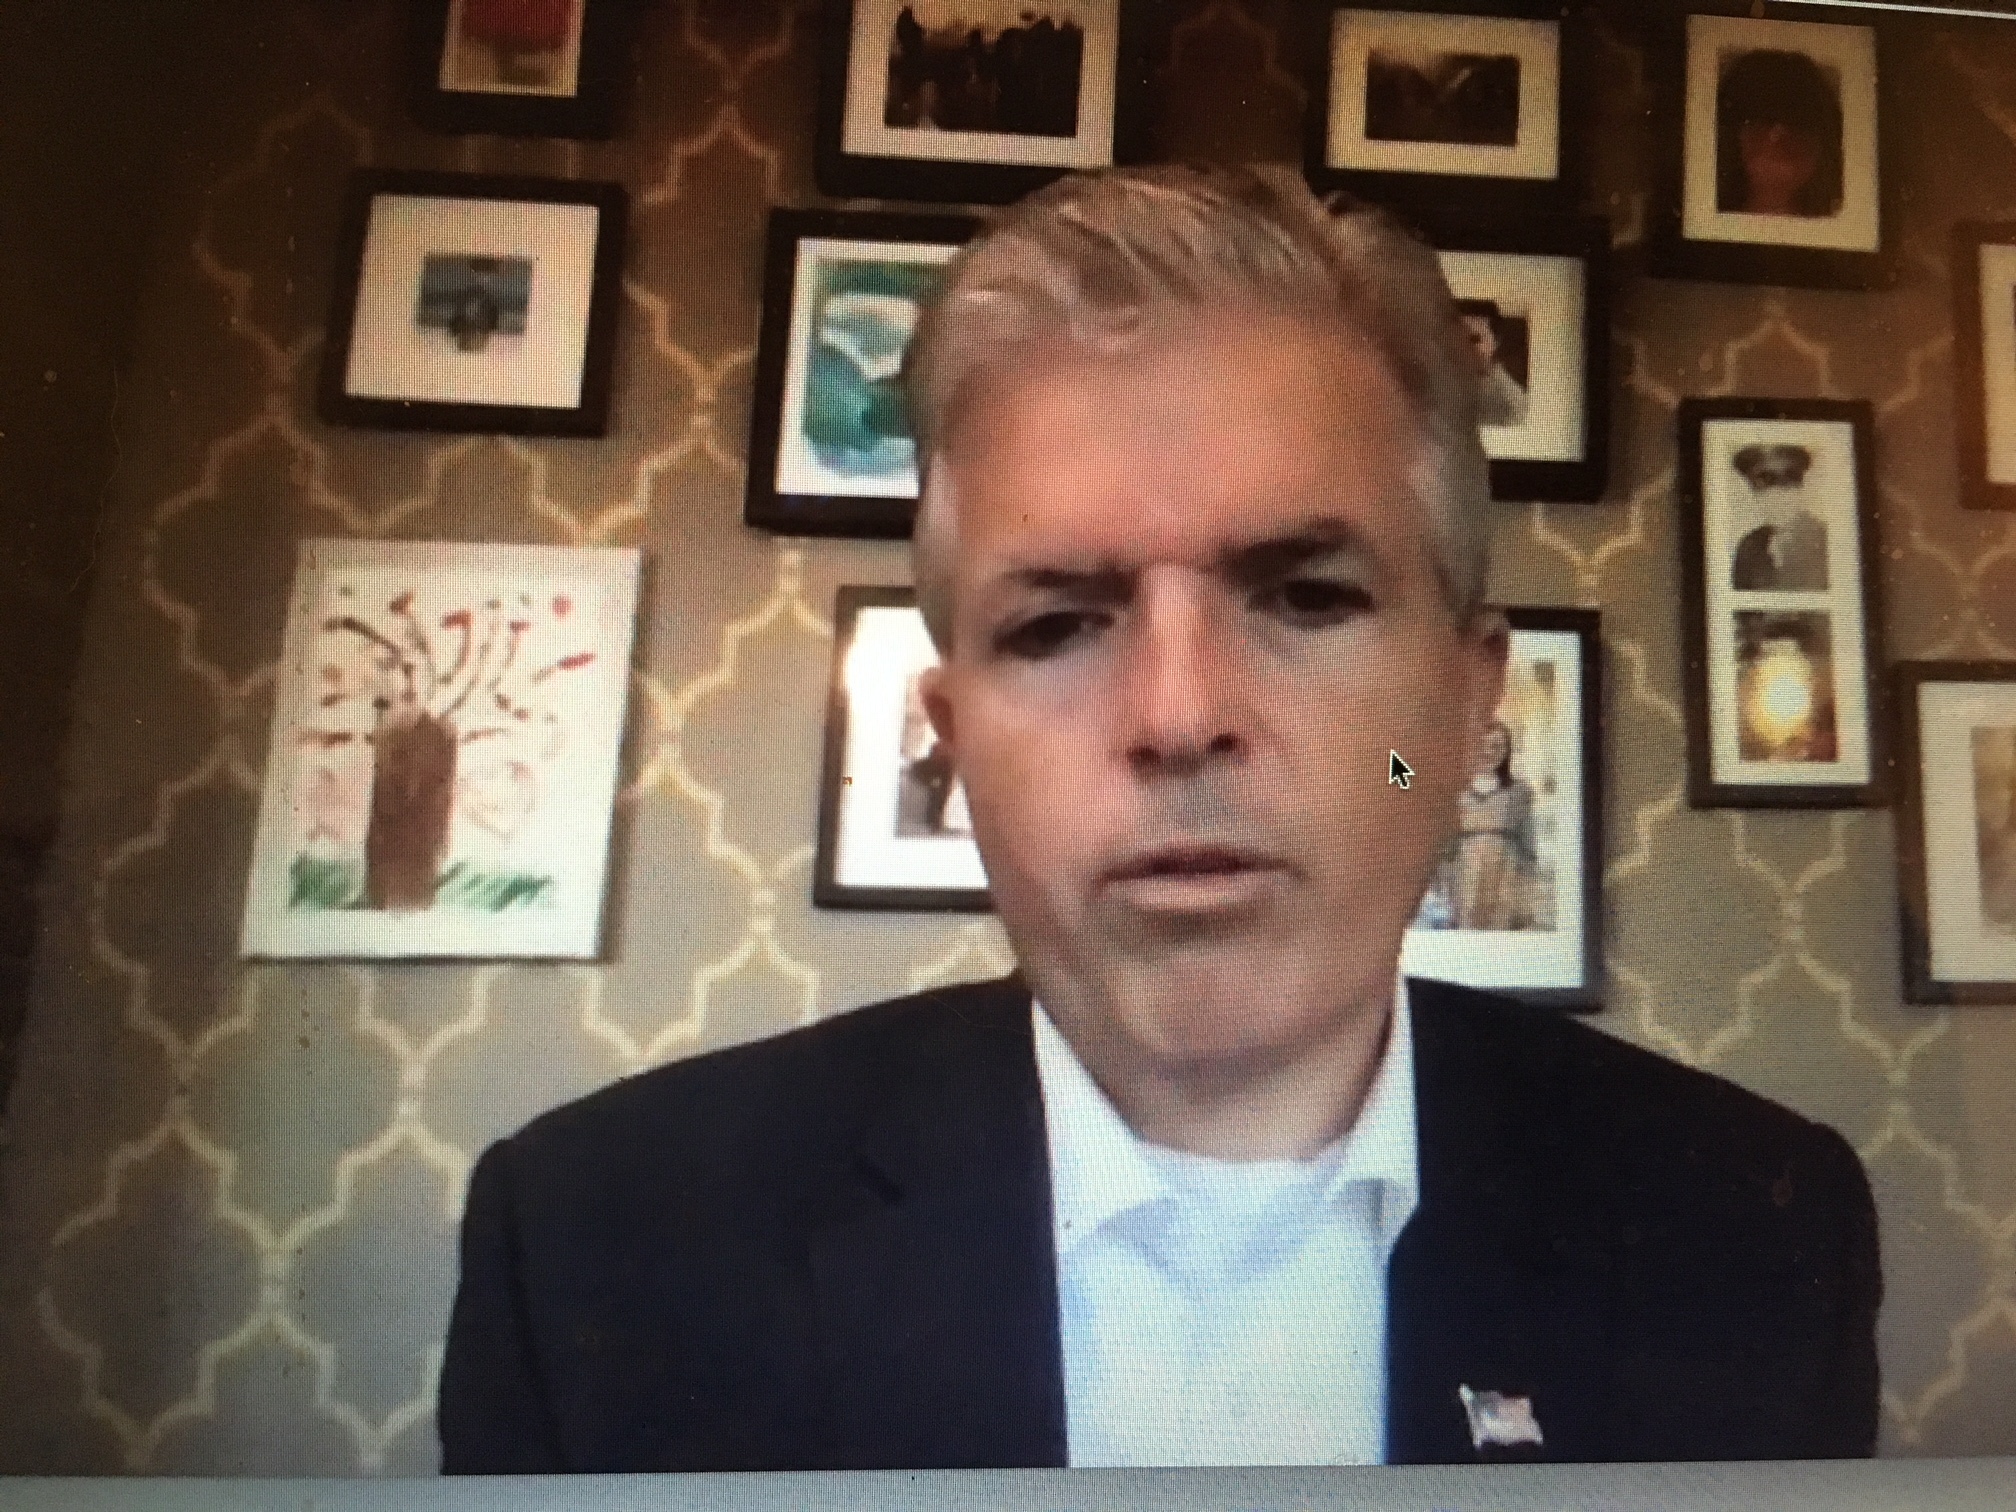 County Executive steve Bellone held daily updates for his children's playroom while under self-quarantine